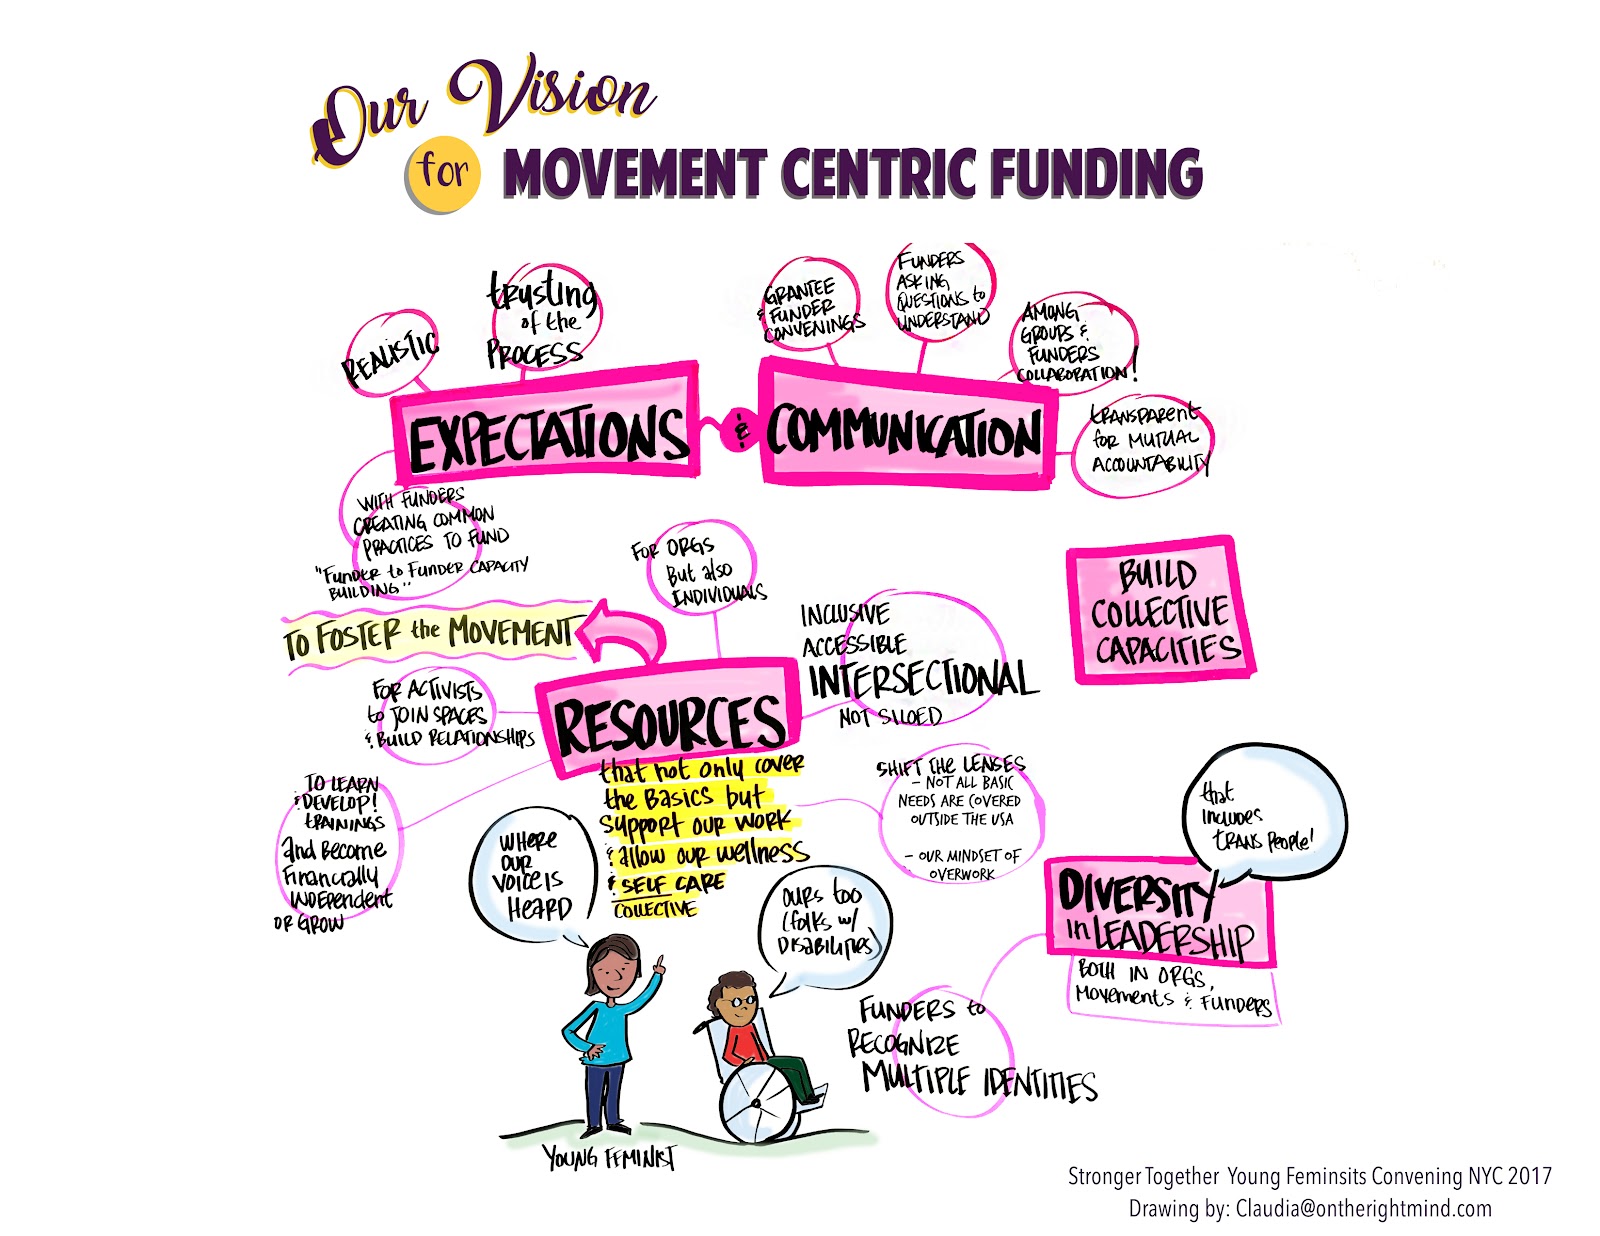 Vision for Movement centric Funding copy.jpg